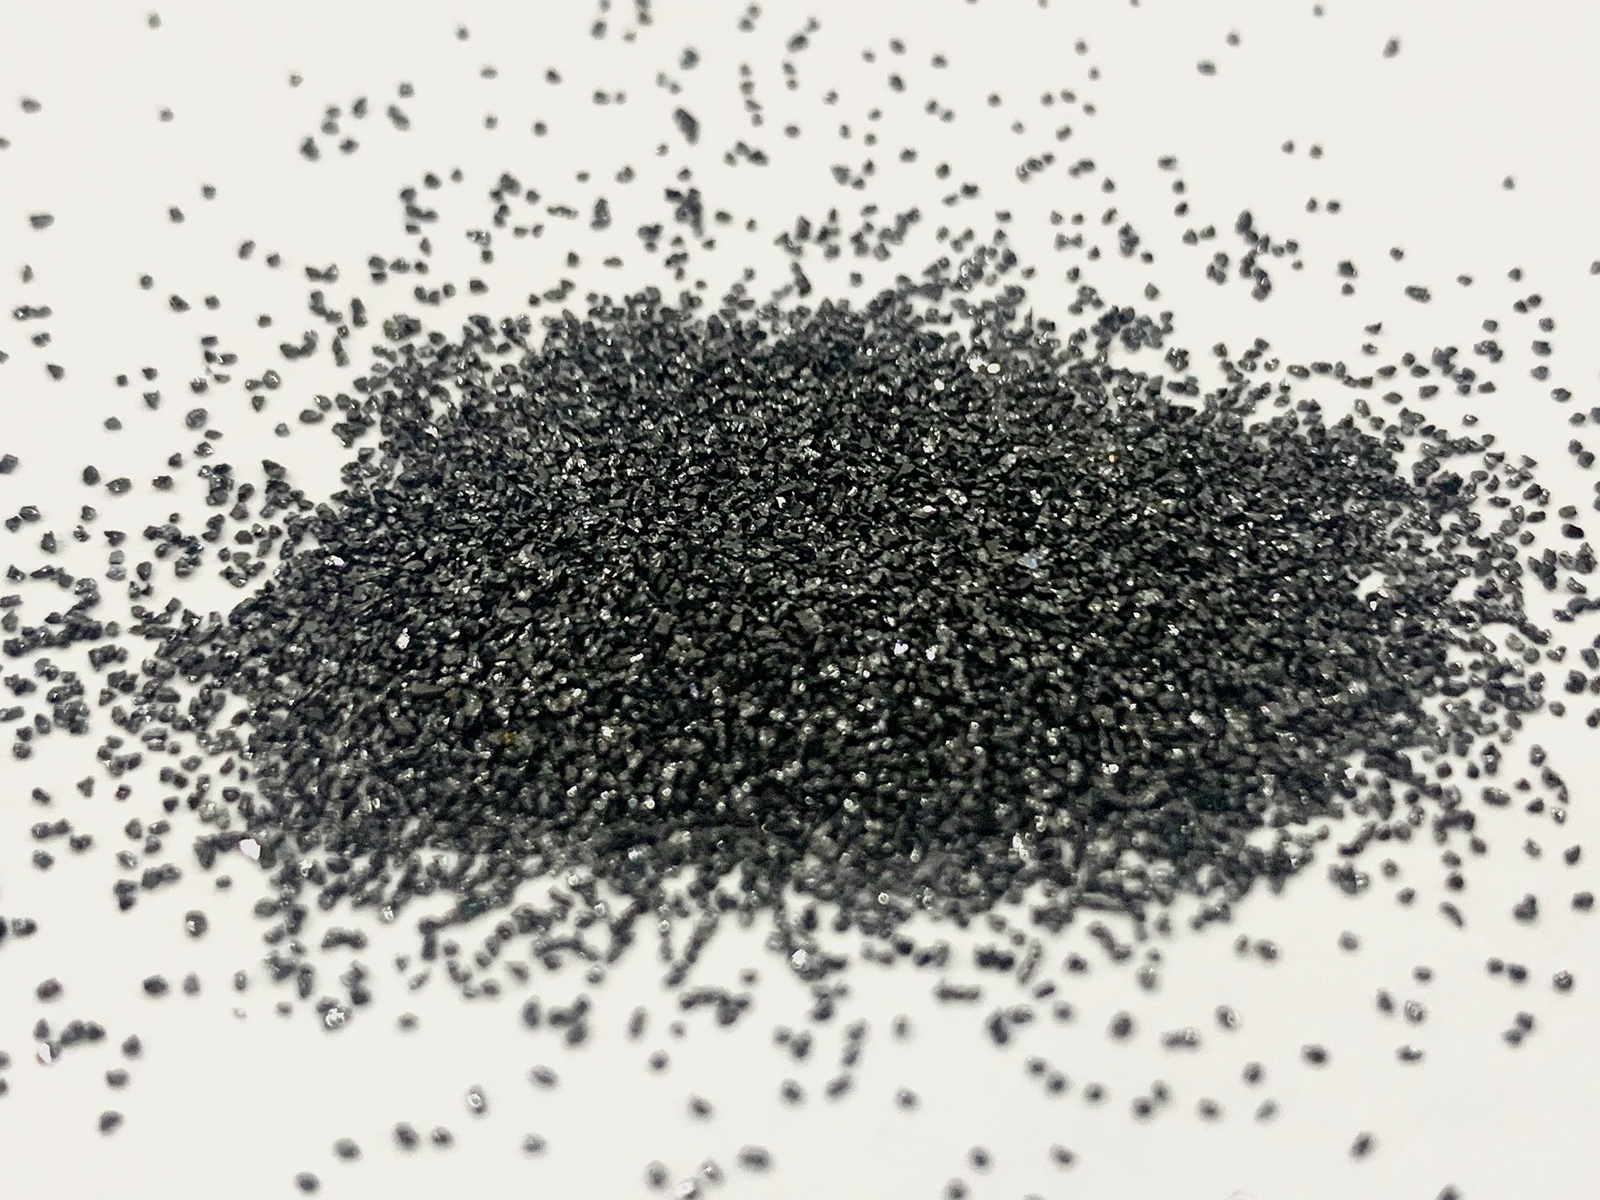 Where is silicon carbide mainly used